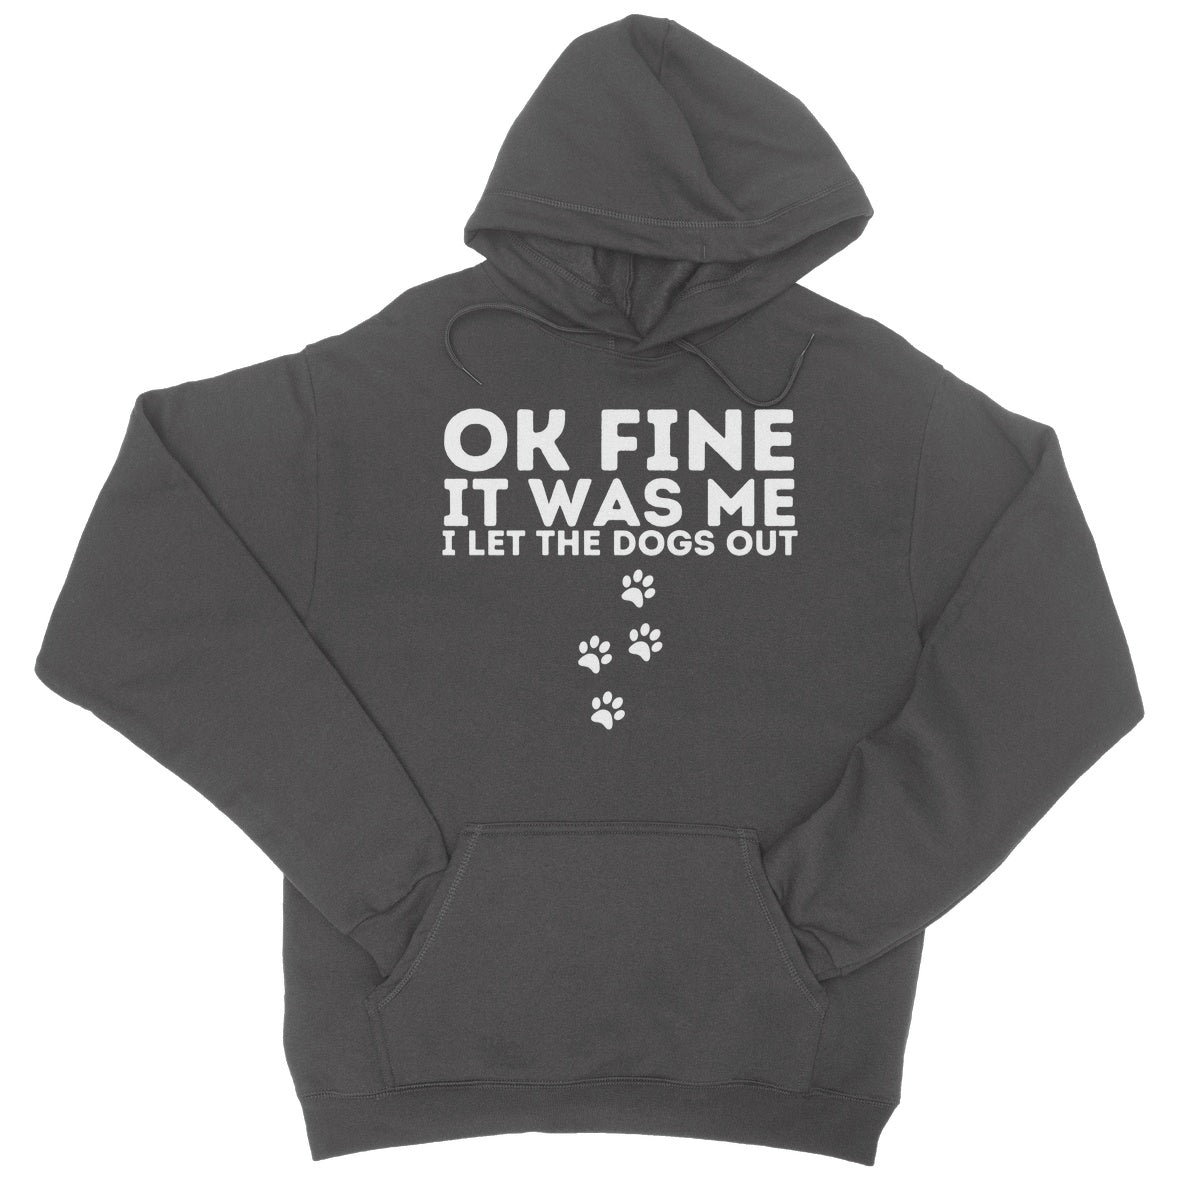 I let the dogs out hoodie grey